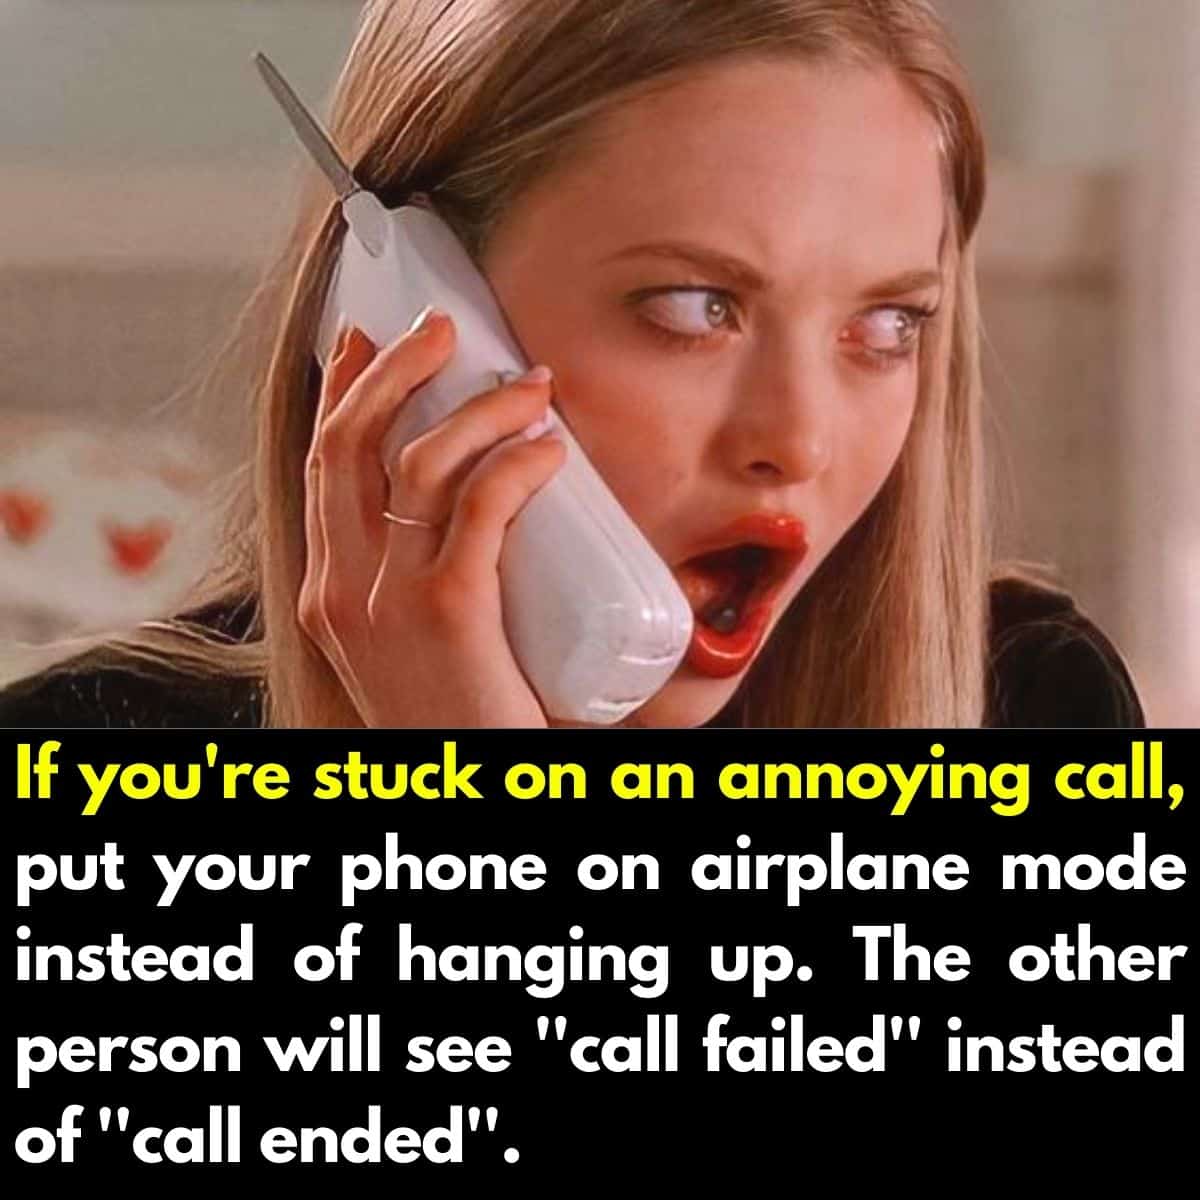 if you're stuck on an annoying call, put your phone on airplane mode instead of hanging up, the other person will see call failed instead of call ended